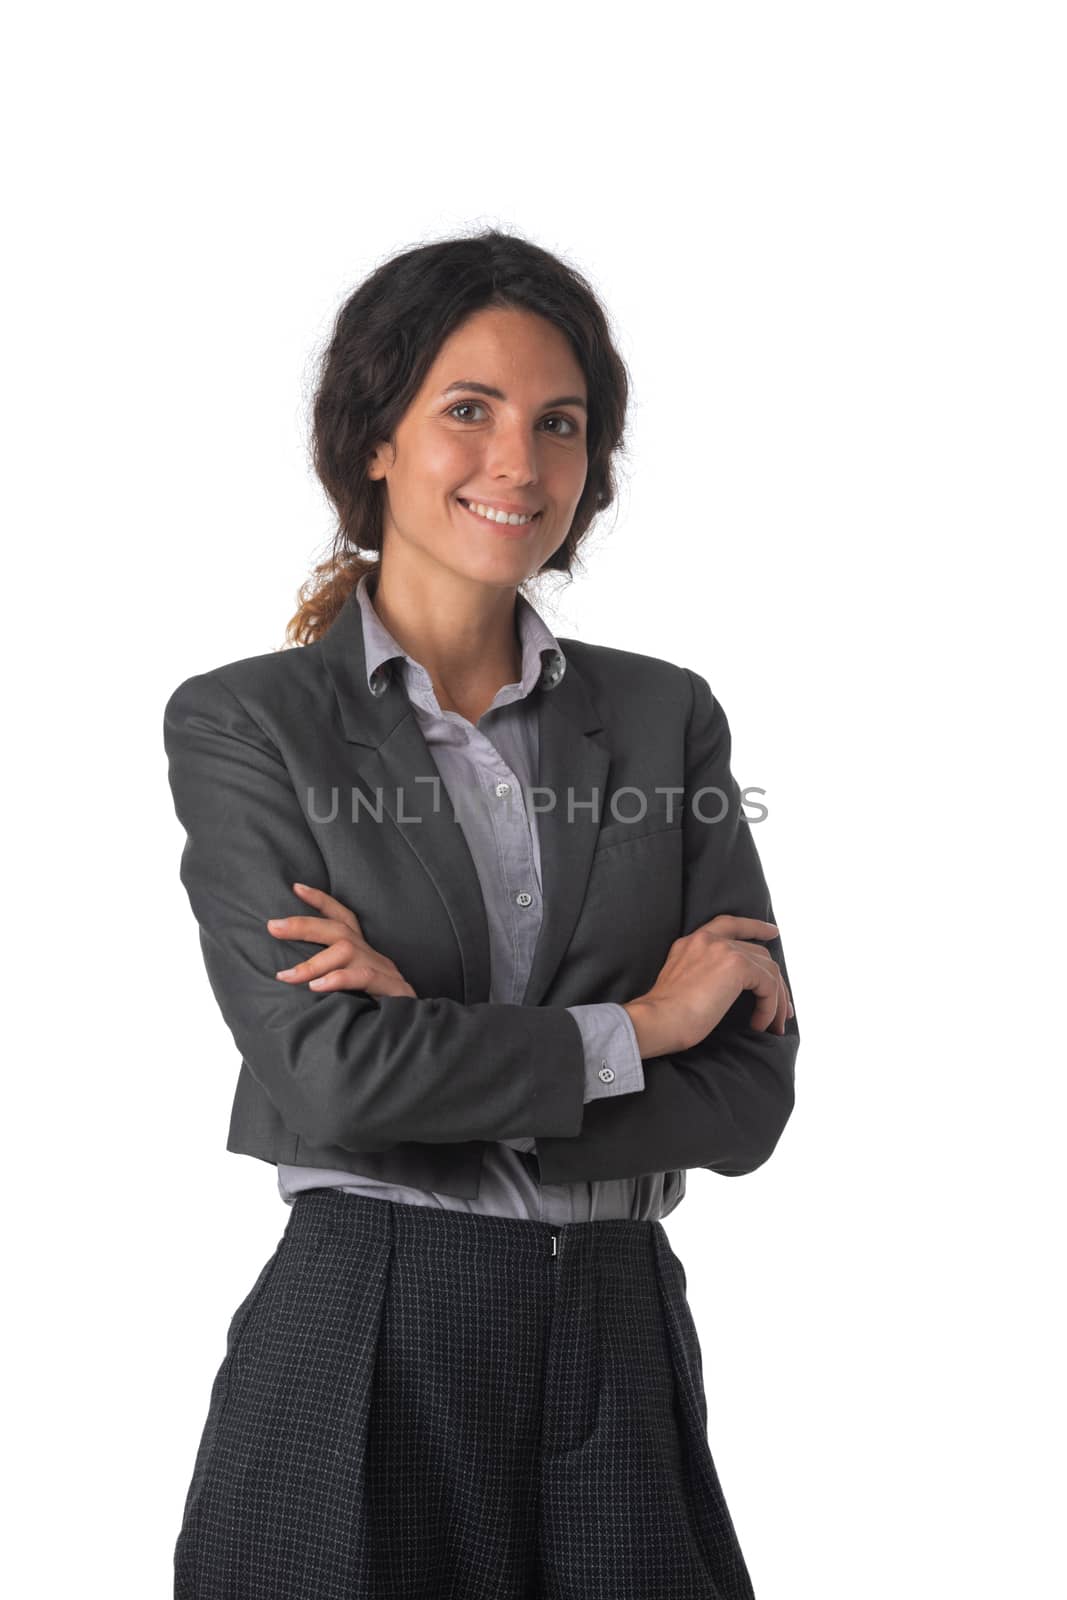 Portrait of young business woman with arms crossed studio isolated on white background